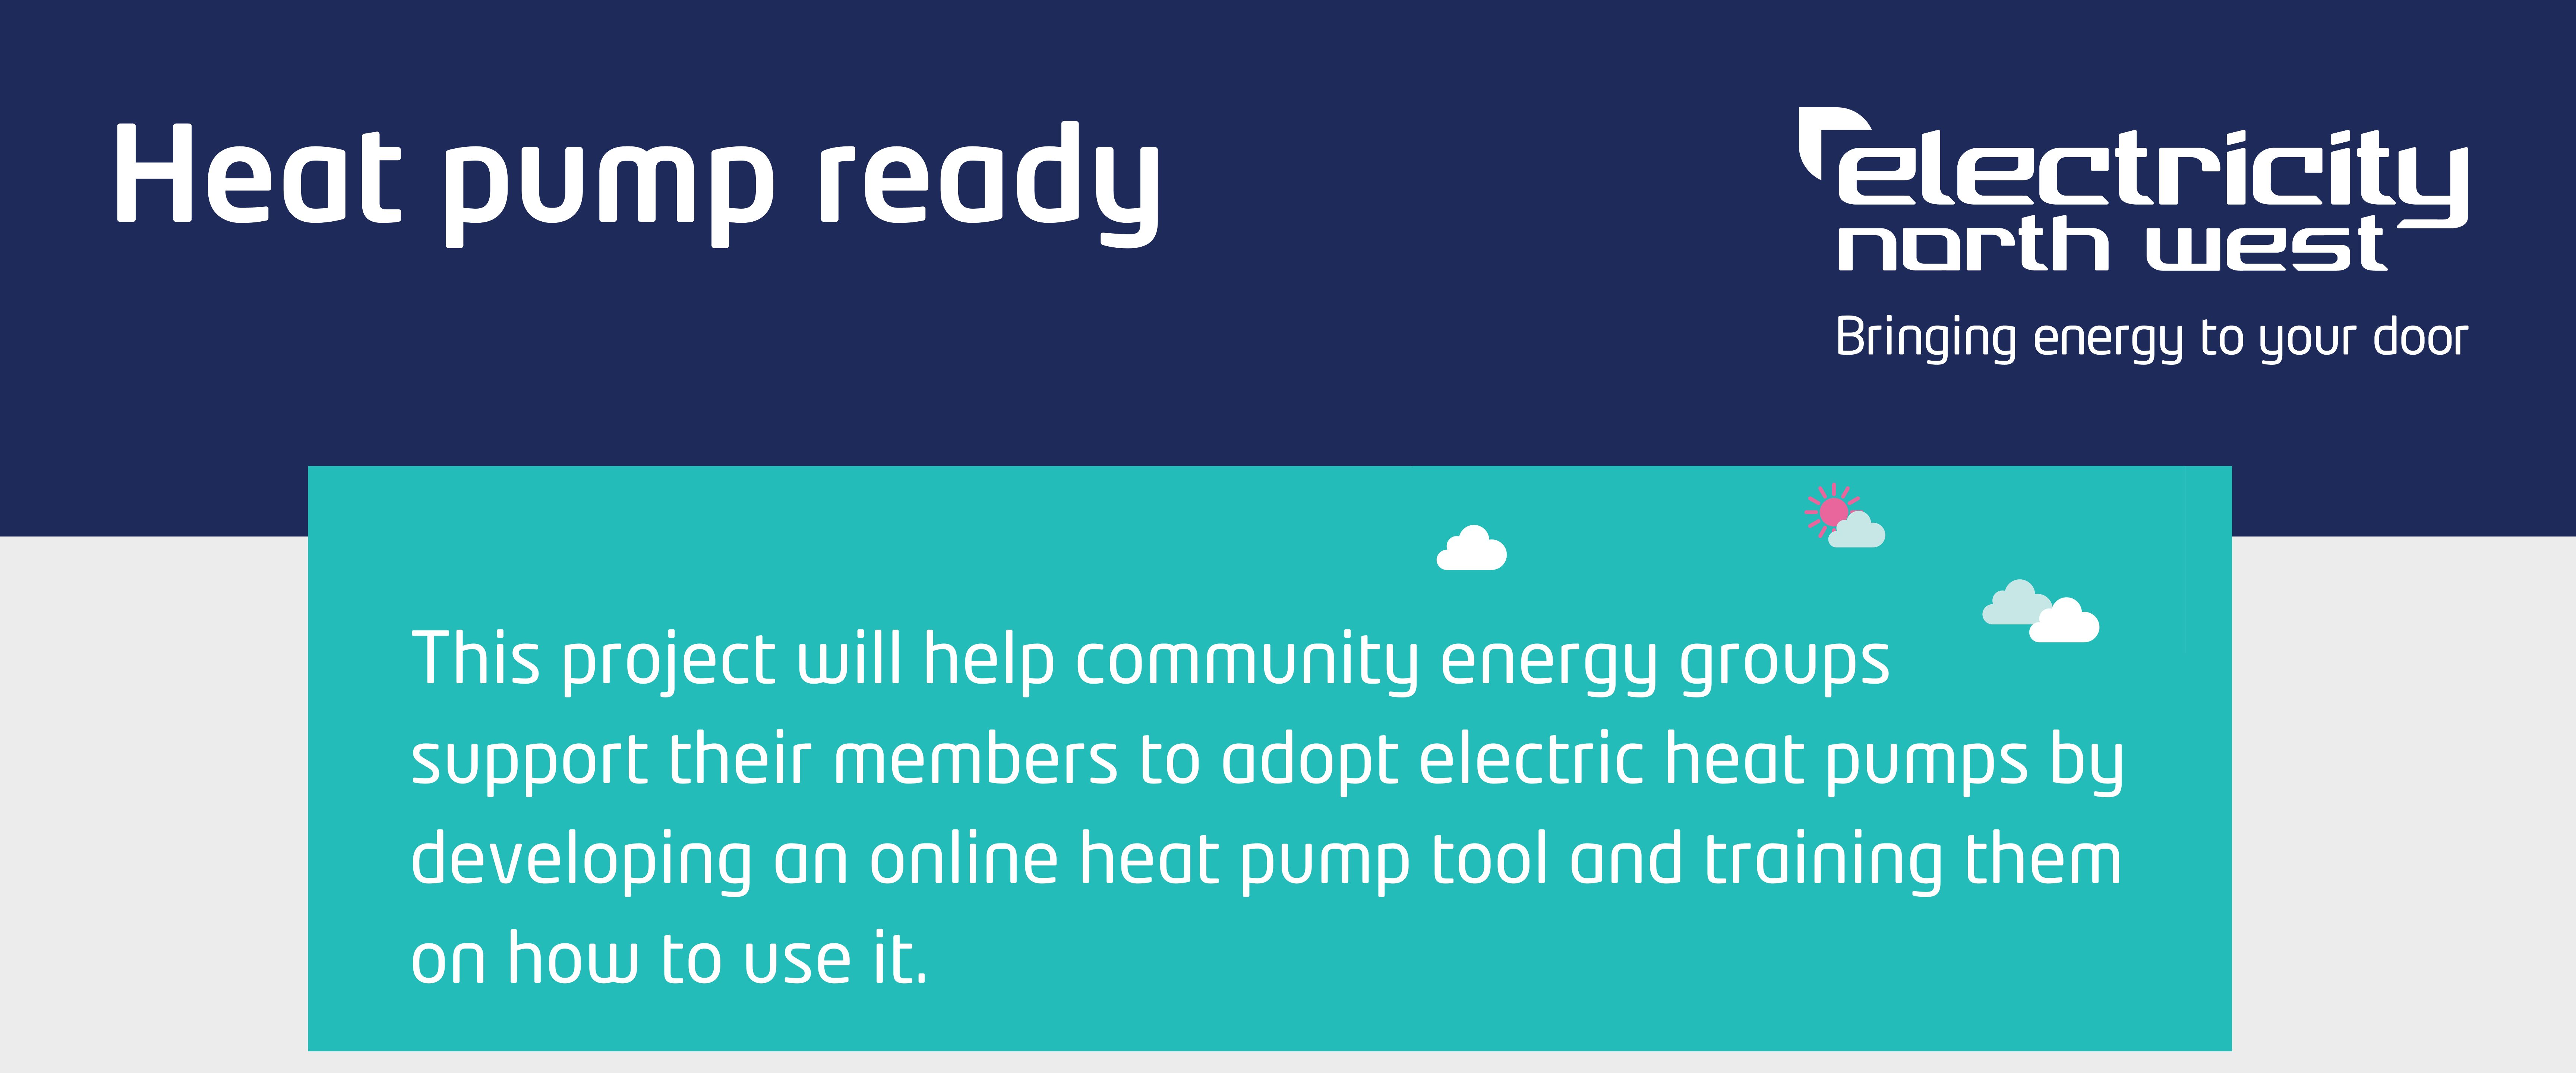 Heat pump ready, This project will help community energy groups support their members to adopt electric heat pumps by developing an online heat pump tool and training on how to use it.